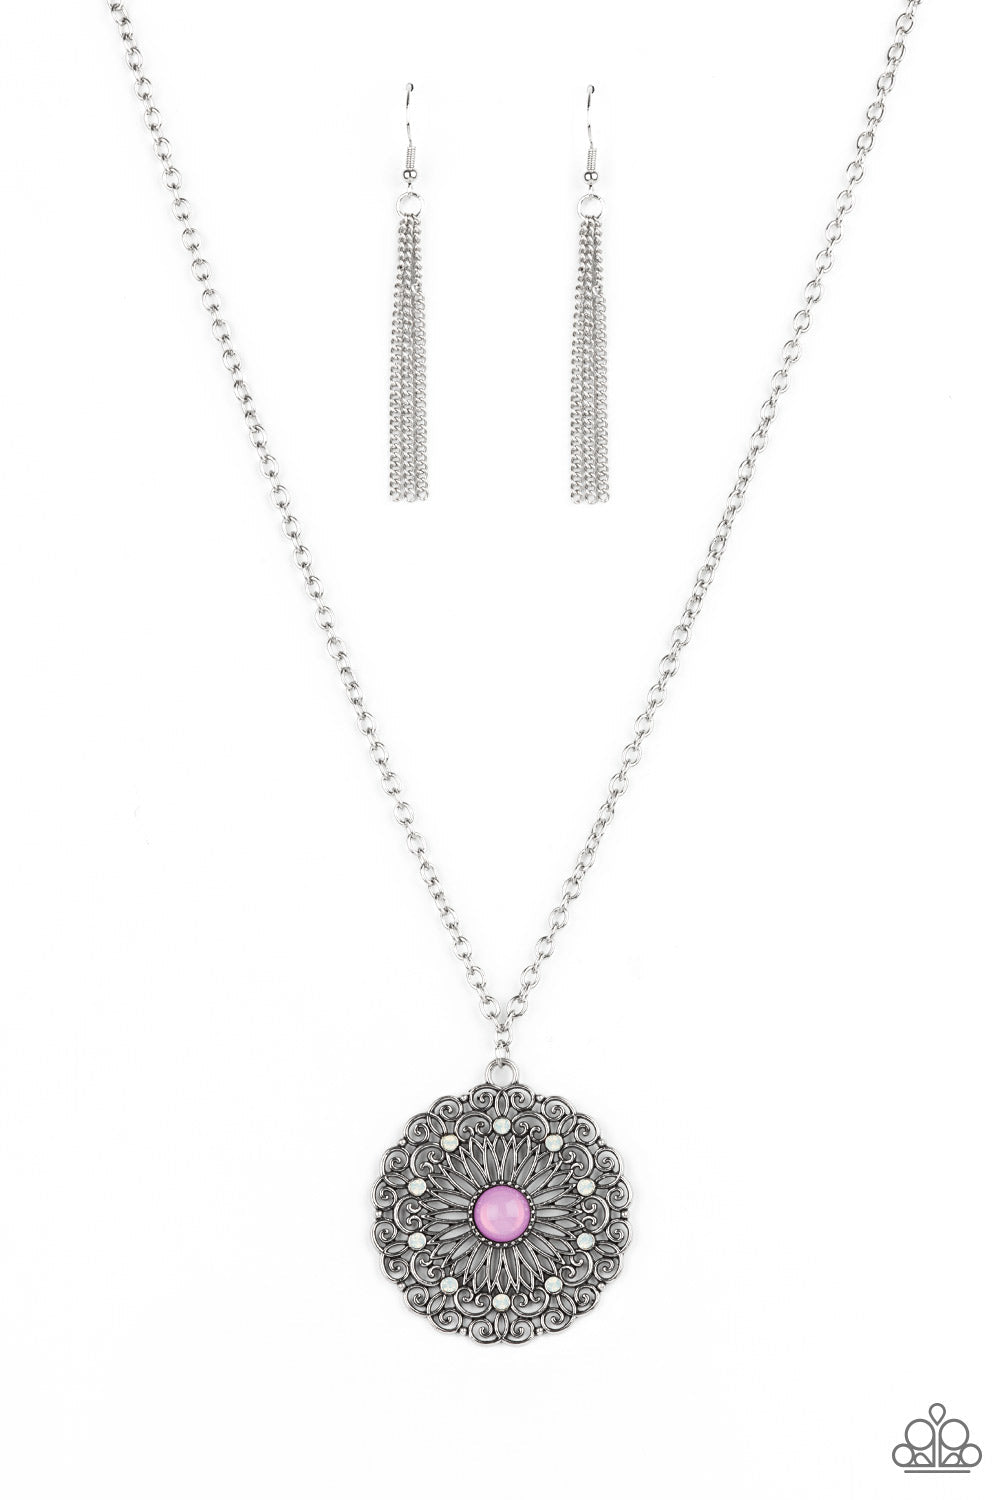 Opal Gardens - Purple and Silver Fashion Necklace - Paparazzi Accessories - Dotted in dainty opalescent beads, stacks of whimsical silver petals bloom from a purple opal beaded center, creating a decorative floral pendant at the bottom of a lengthened silver chain. Features an adjustable clasp closure.